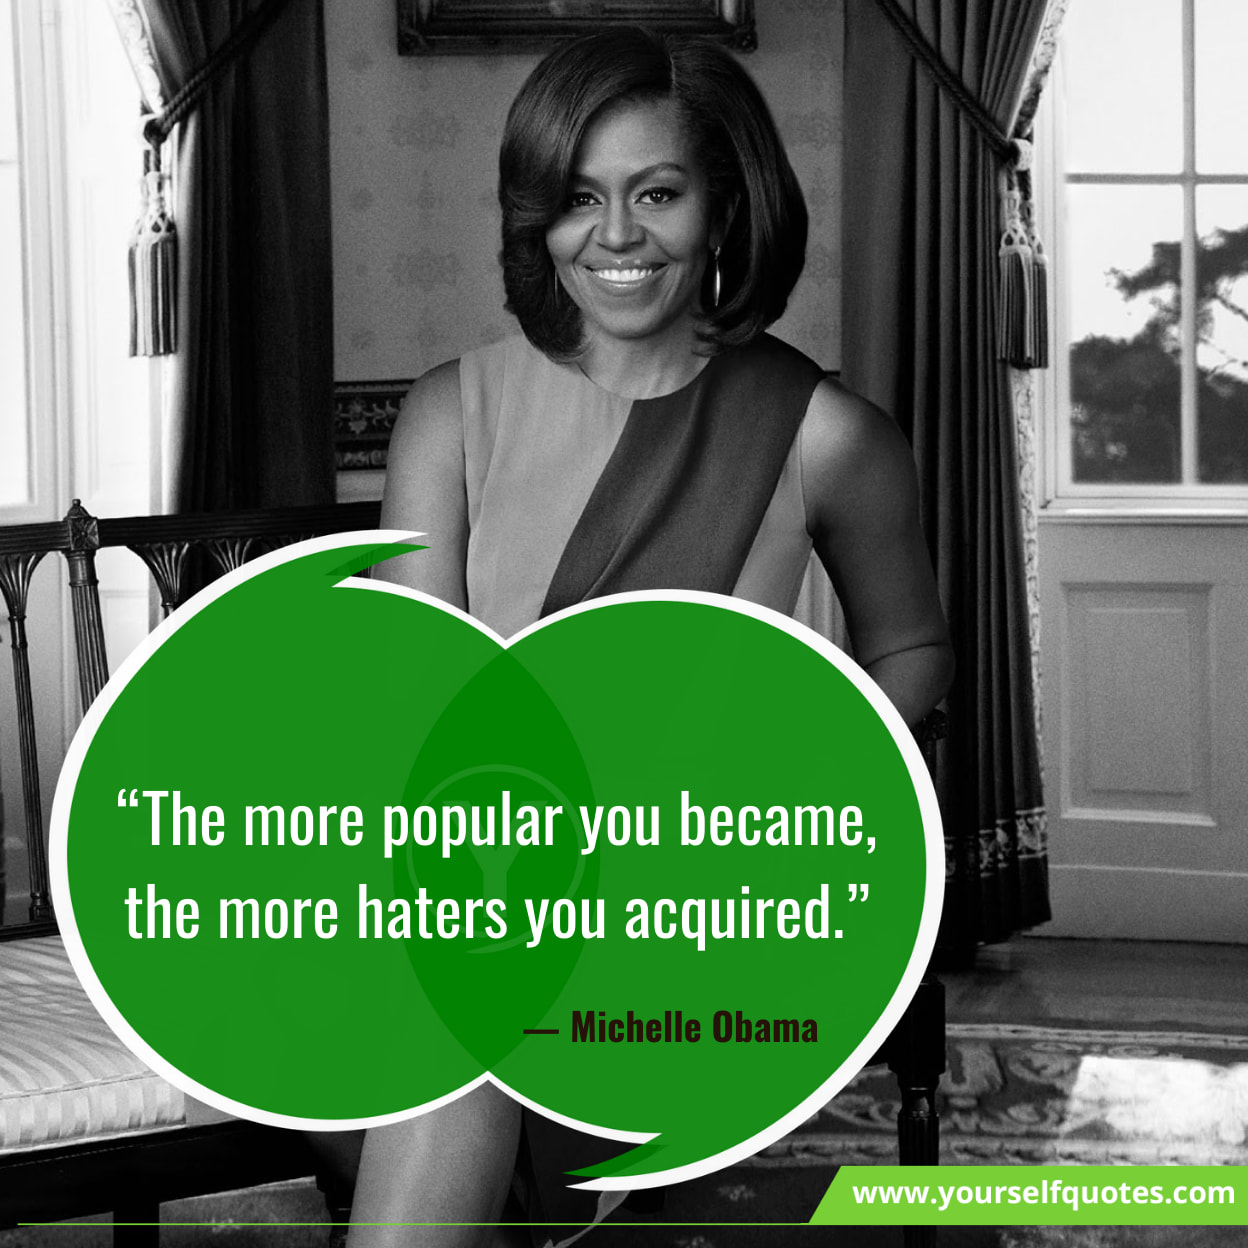 Michelle Obama Quotes for Life